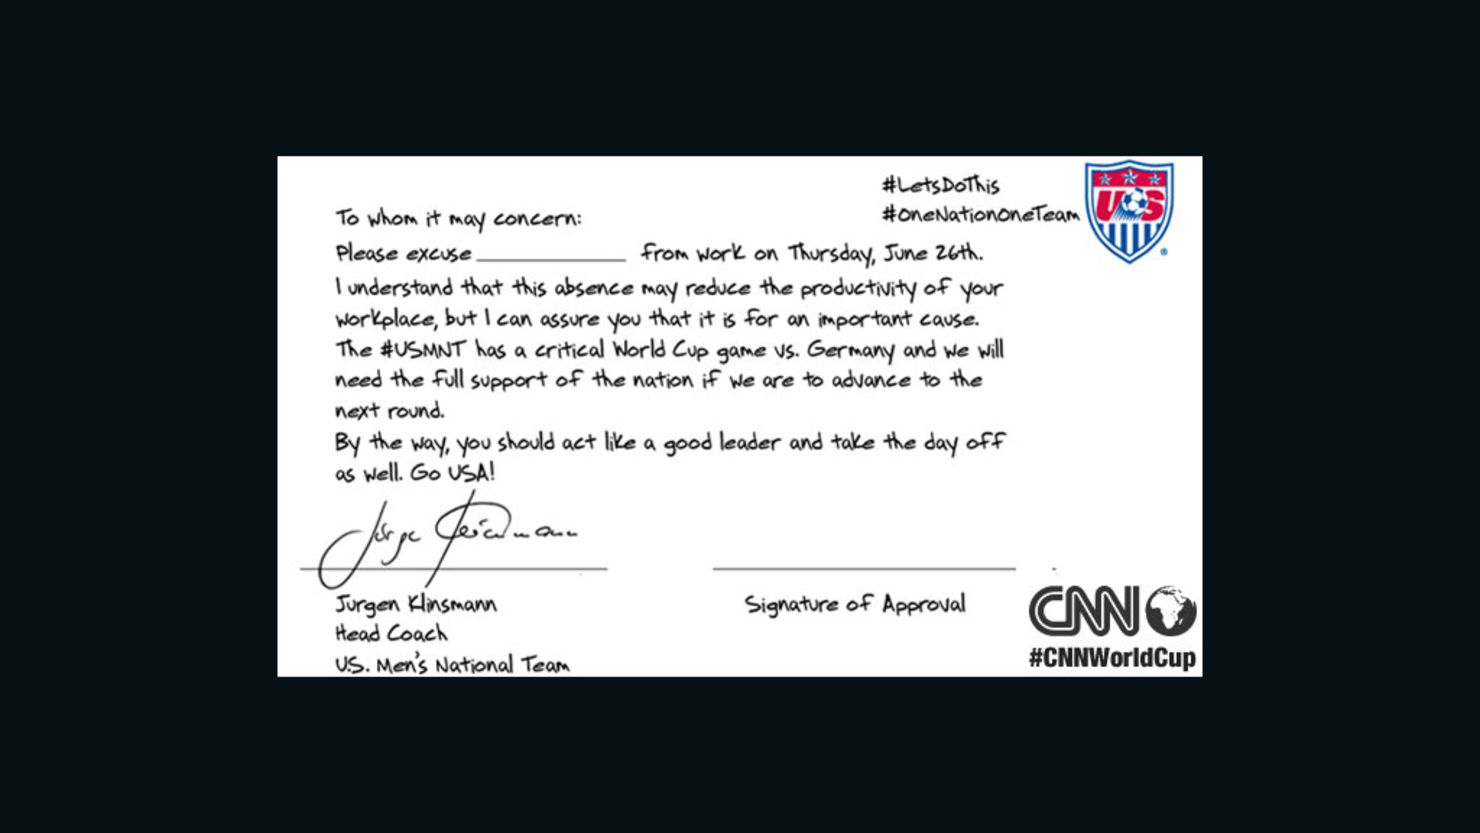 Team USA coach Jurgen Klinsmann tweeted a form letter for employees to give their bosses.